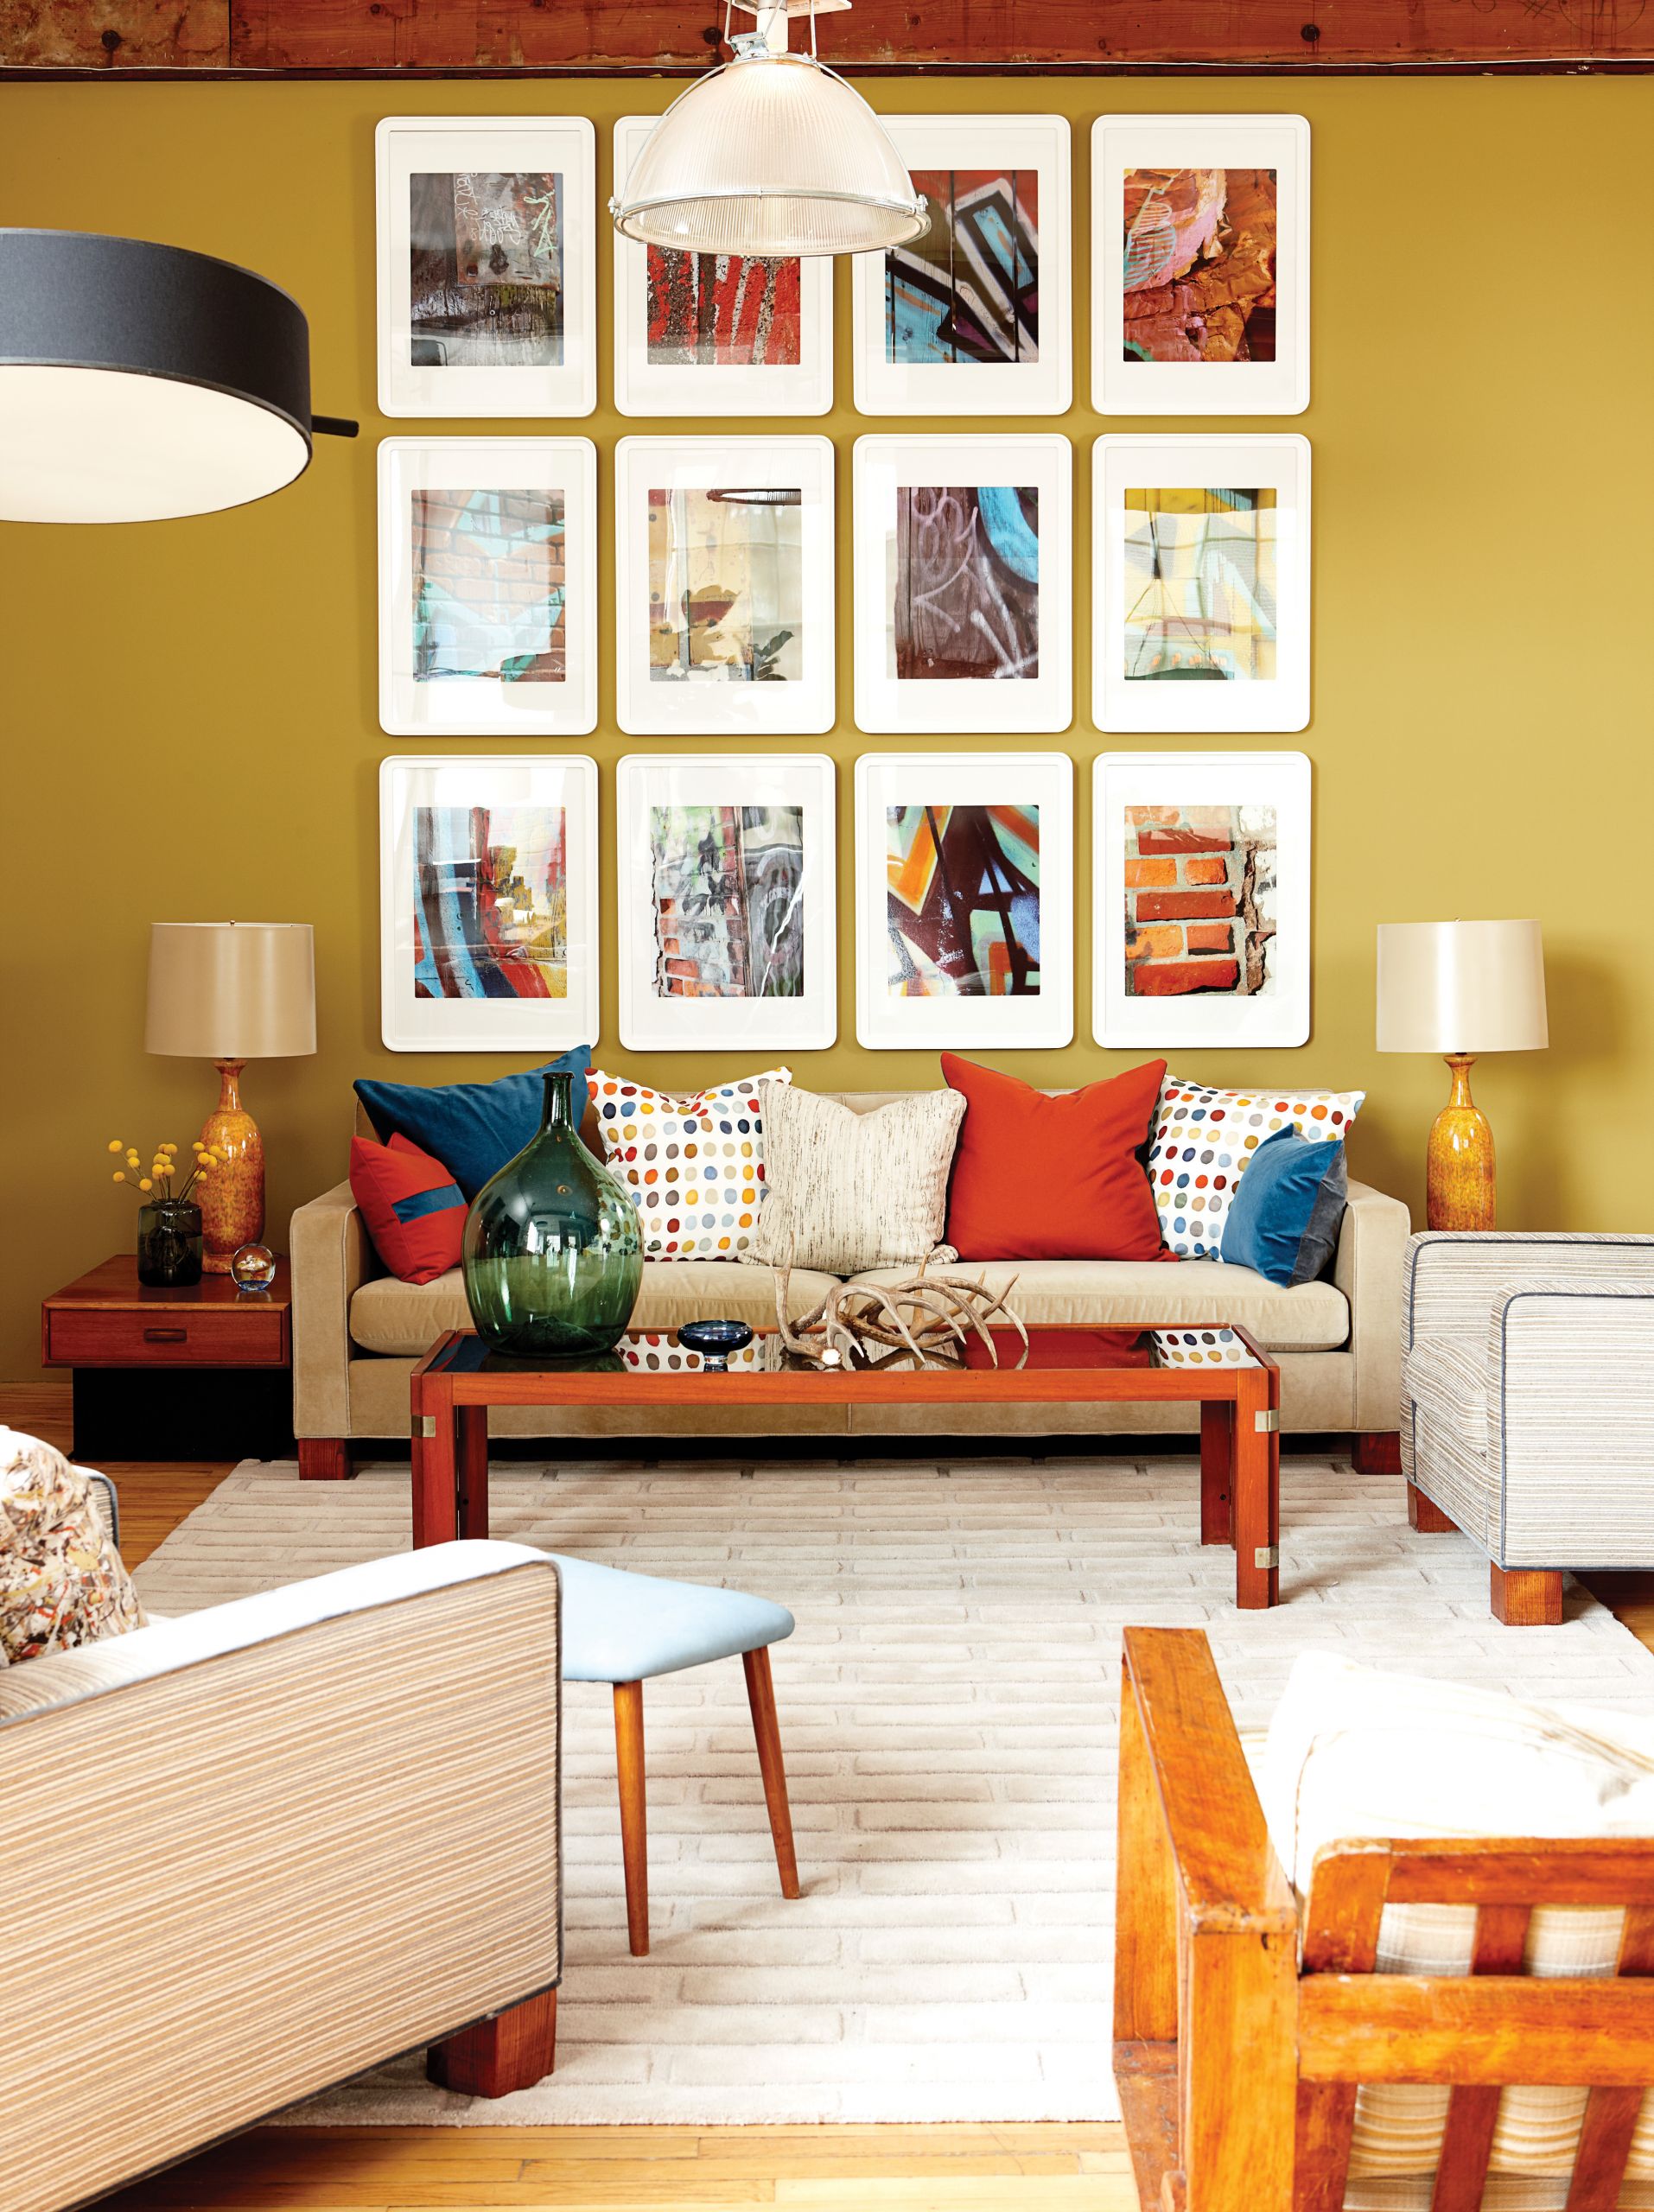 Living Room Wall Decor Pictures
 Loft decorating ideas Nine tips from Sarah Richardson